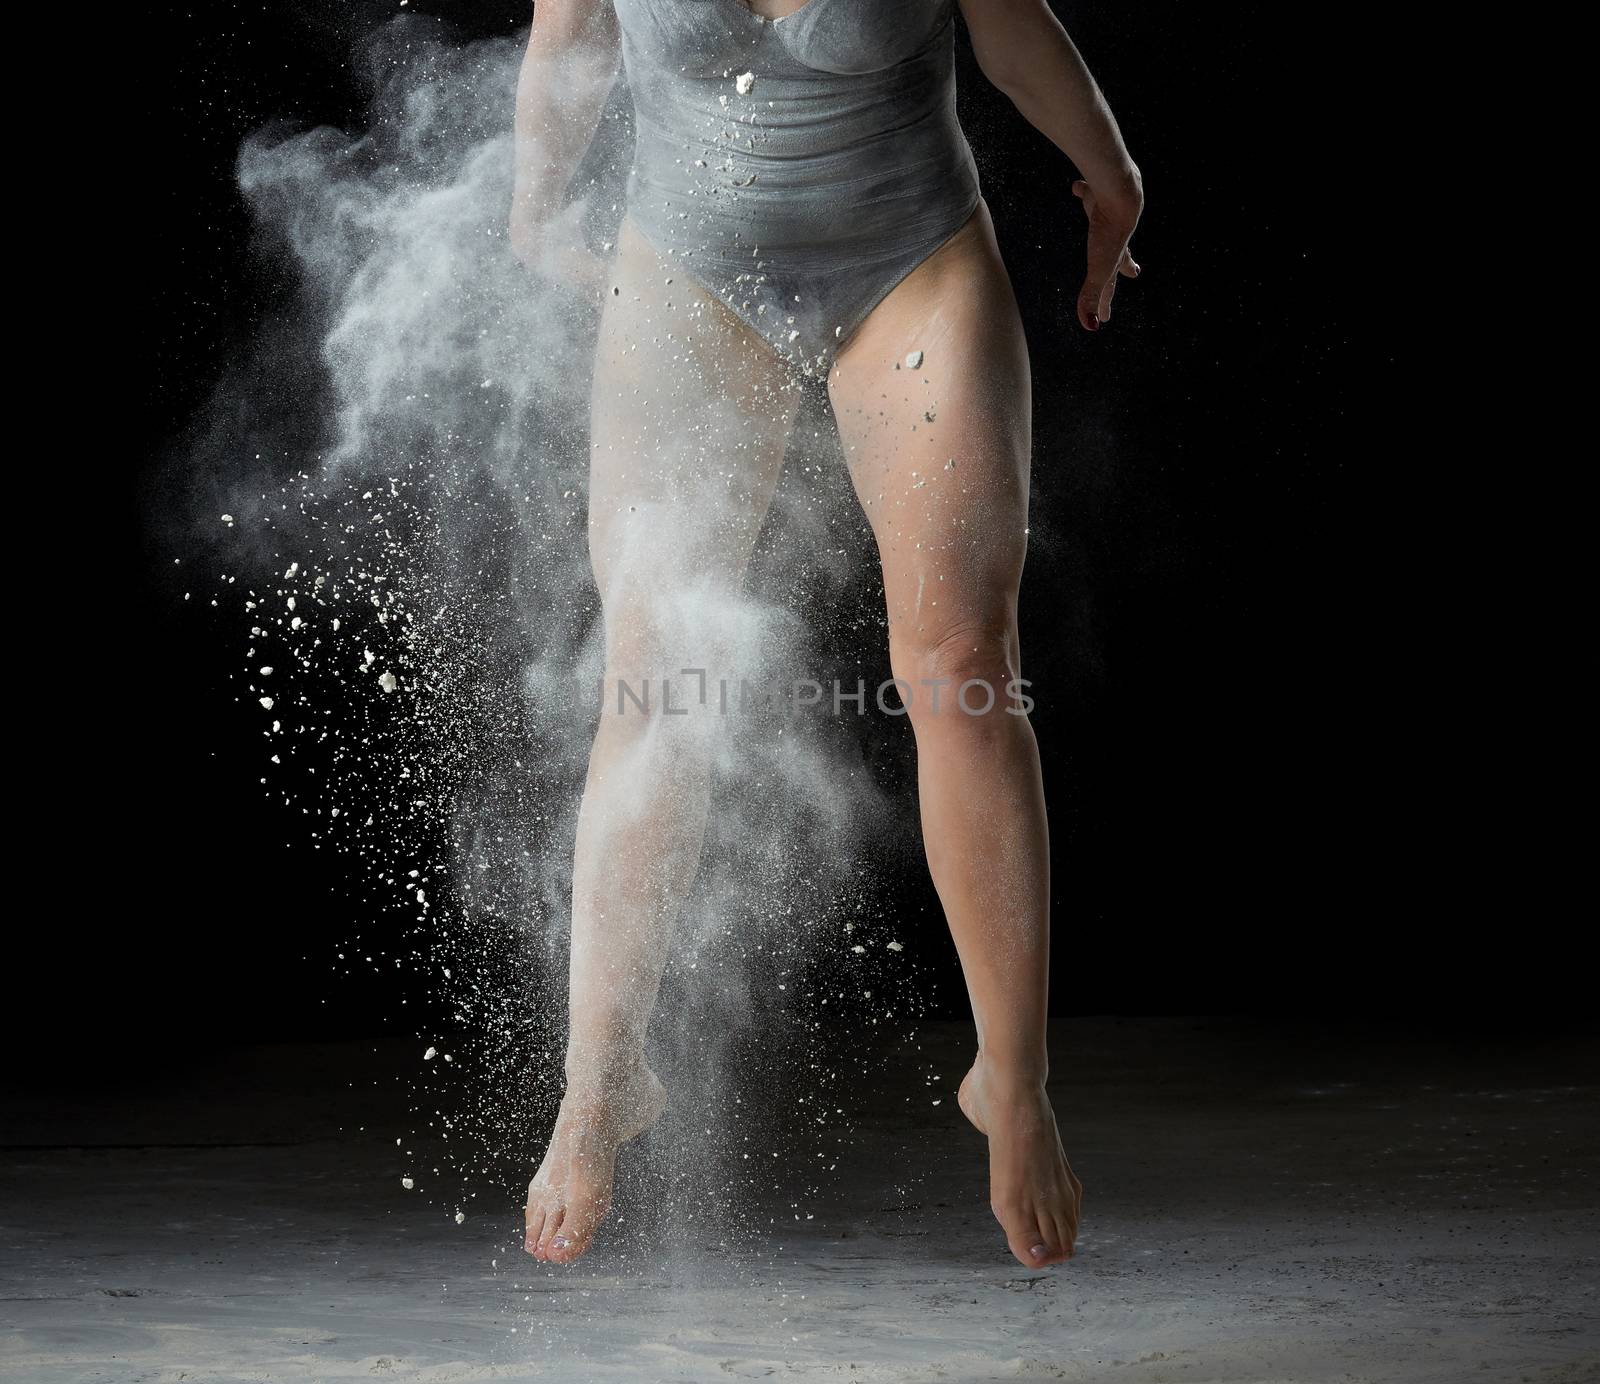 muscular legs of a dancing athlete in a jump, white flour dust cloud, black background, woman dressed in black bodysuit